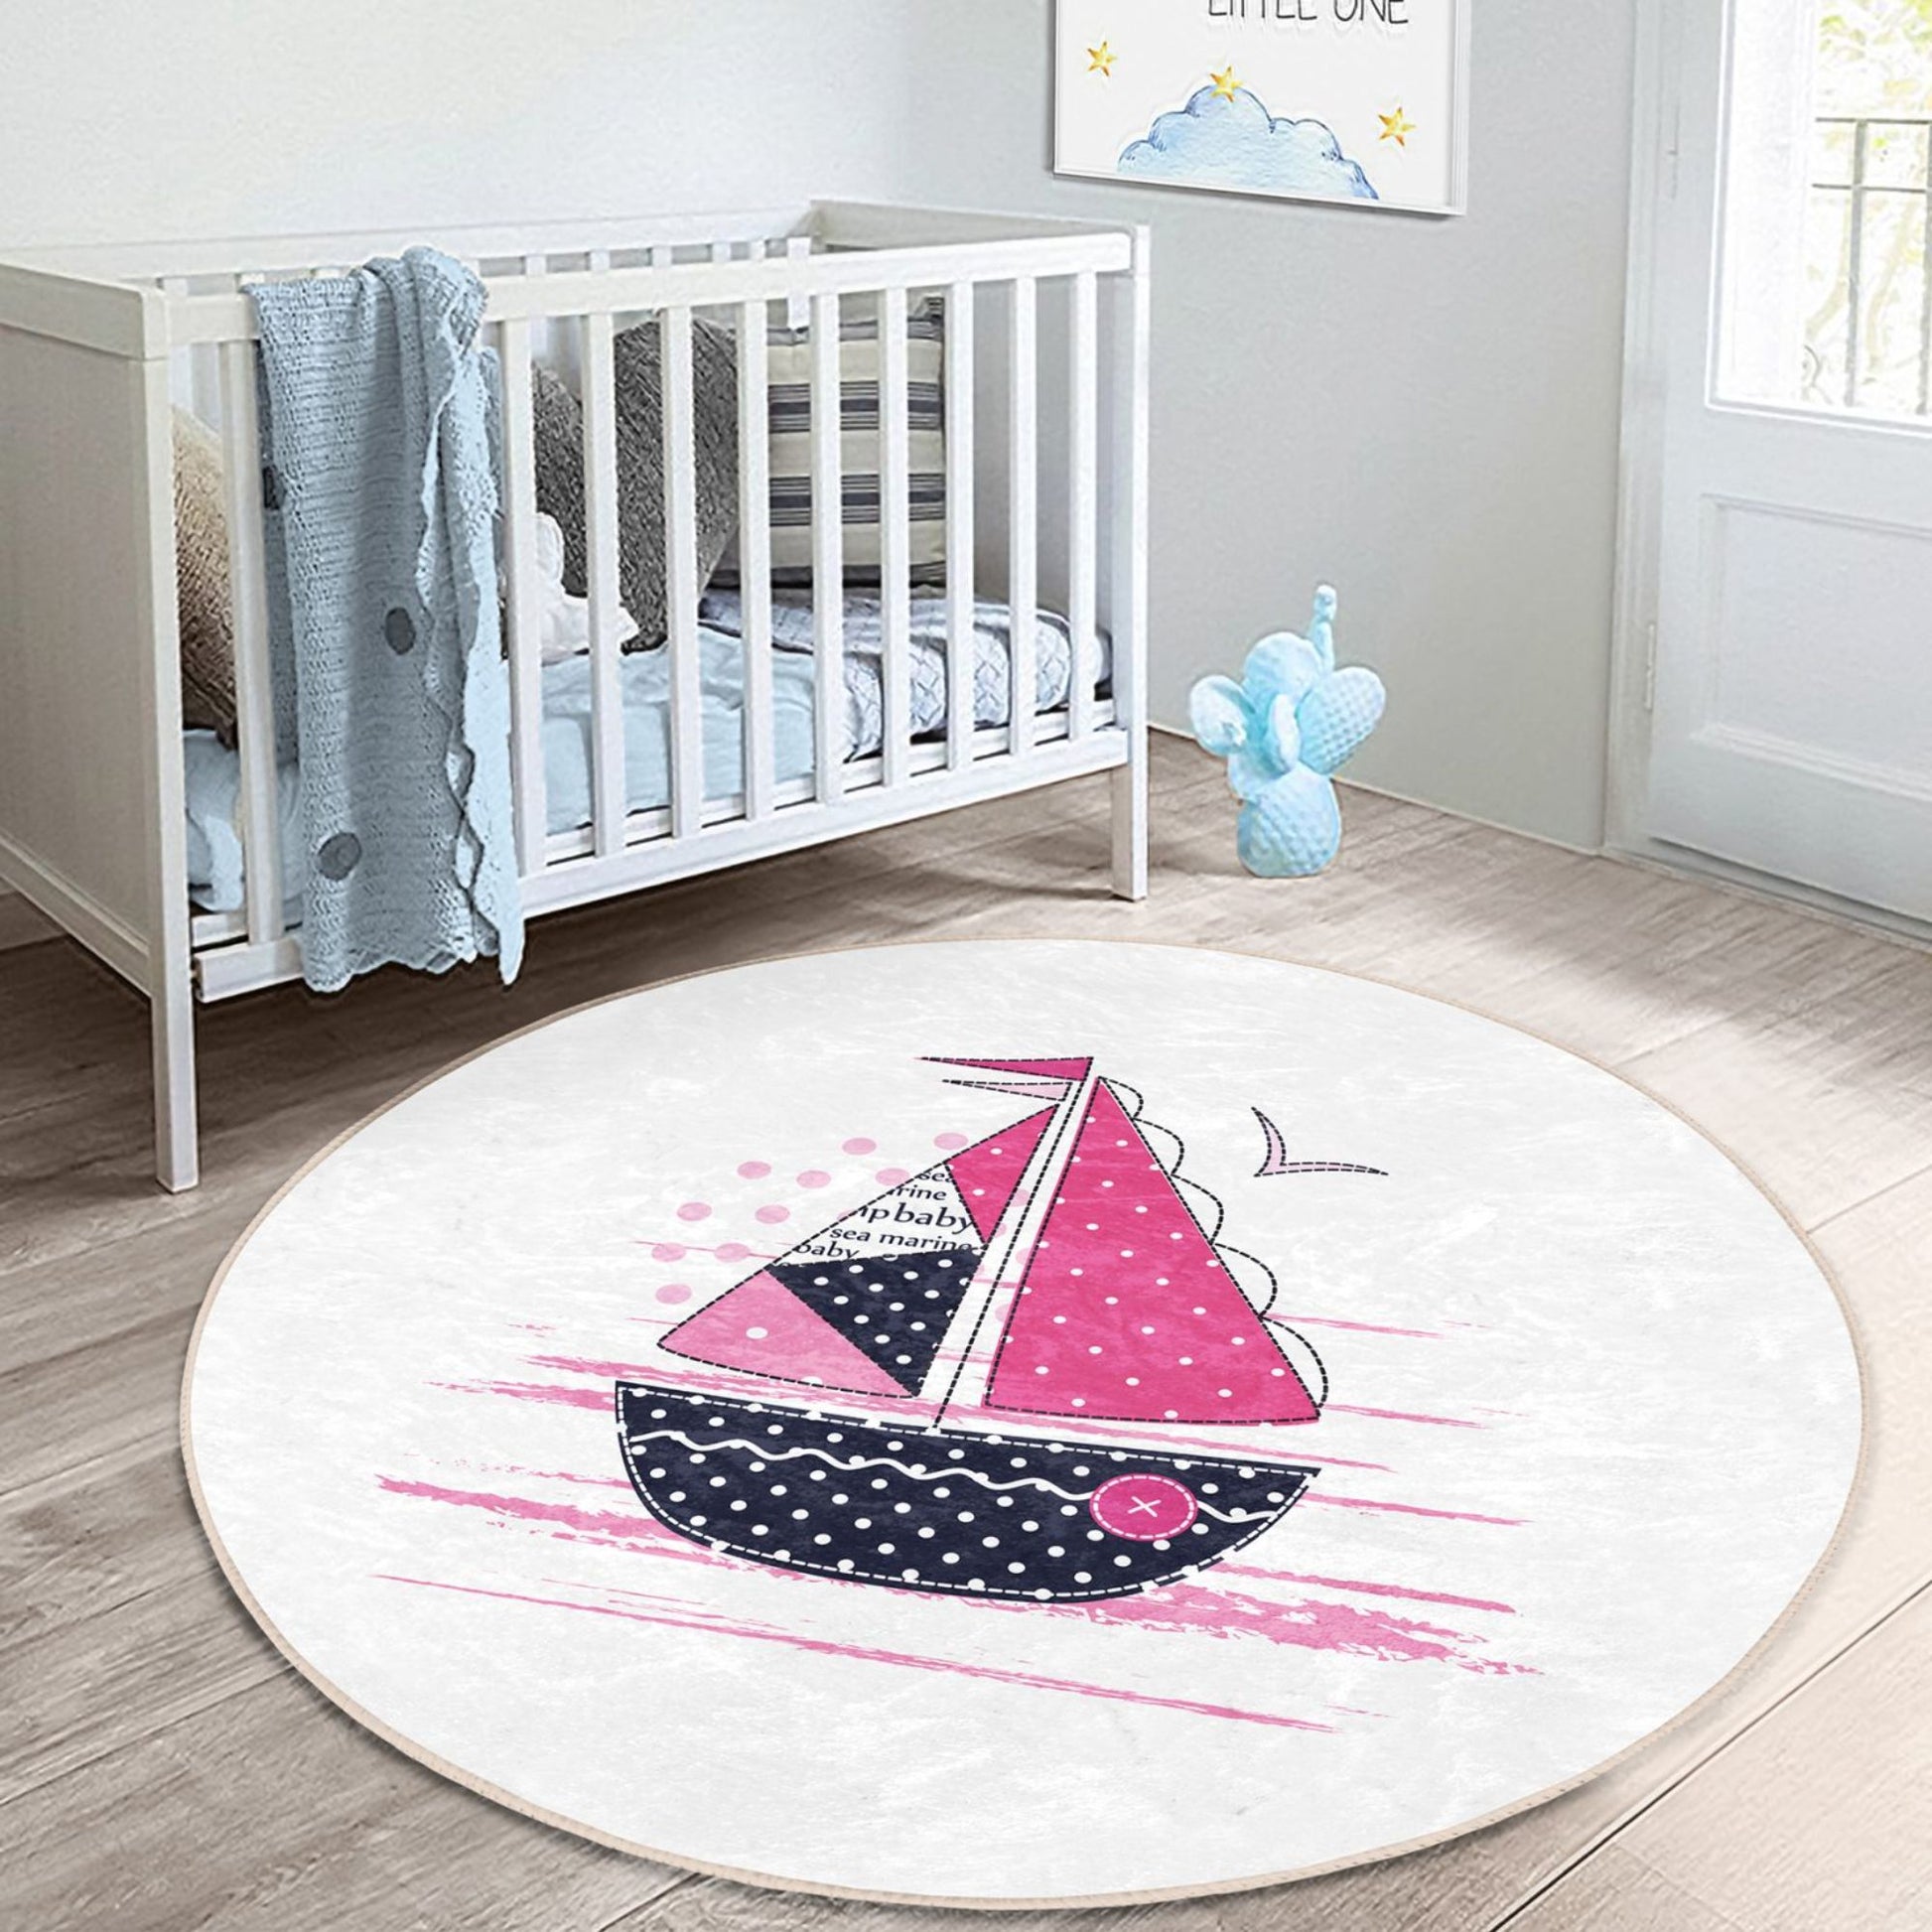 Homeezone Kids Rug - Set Sail for Fun in Your Child's Room